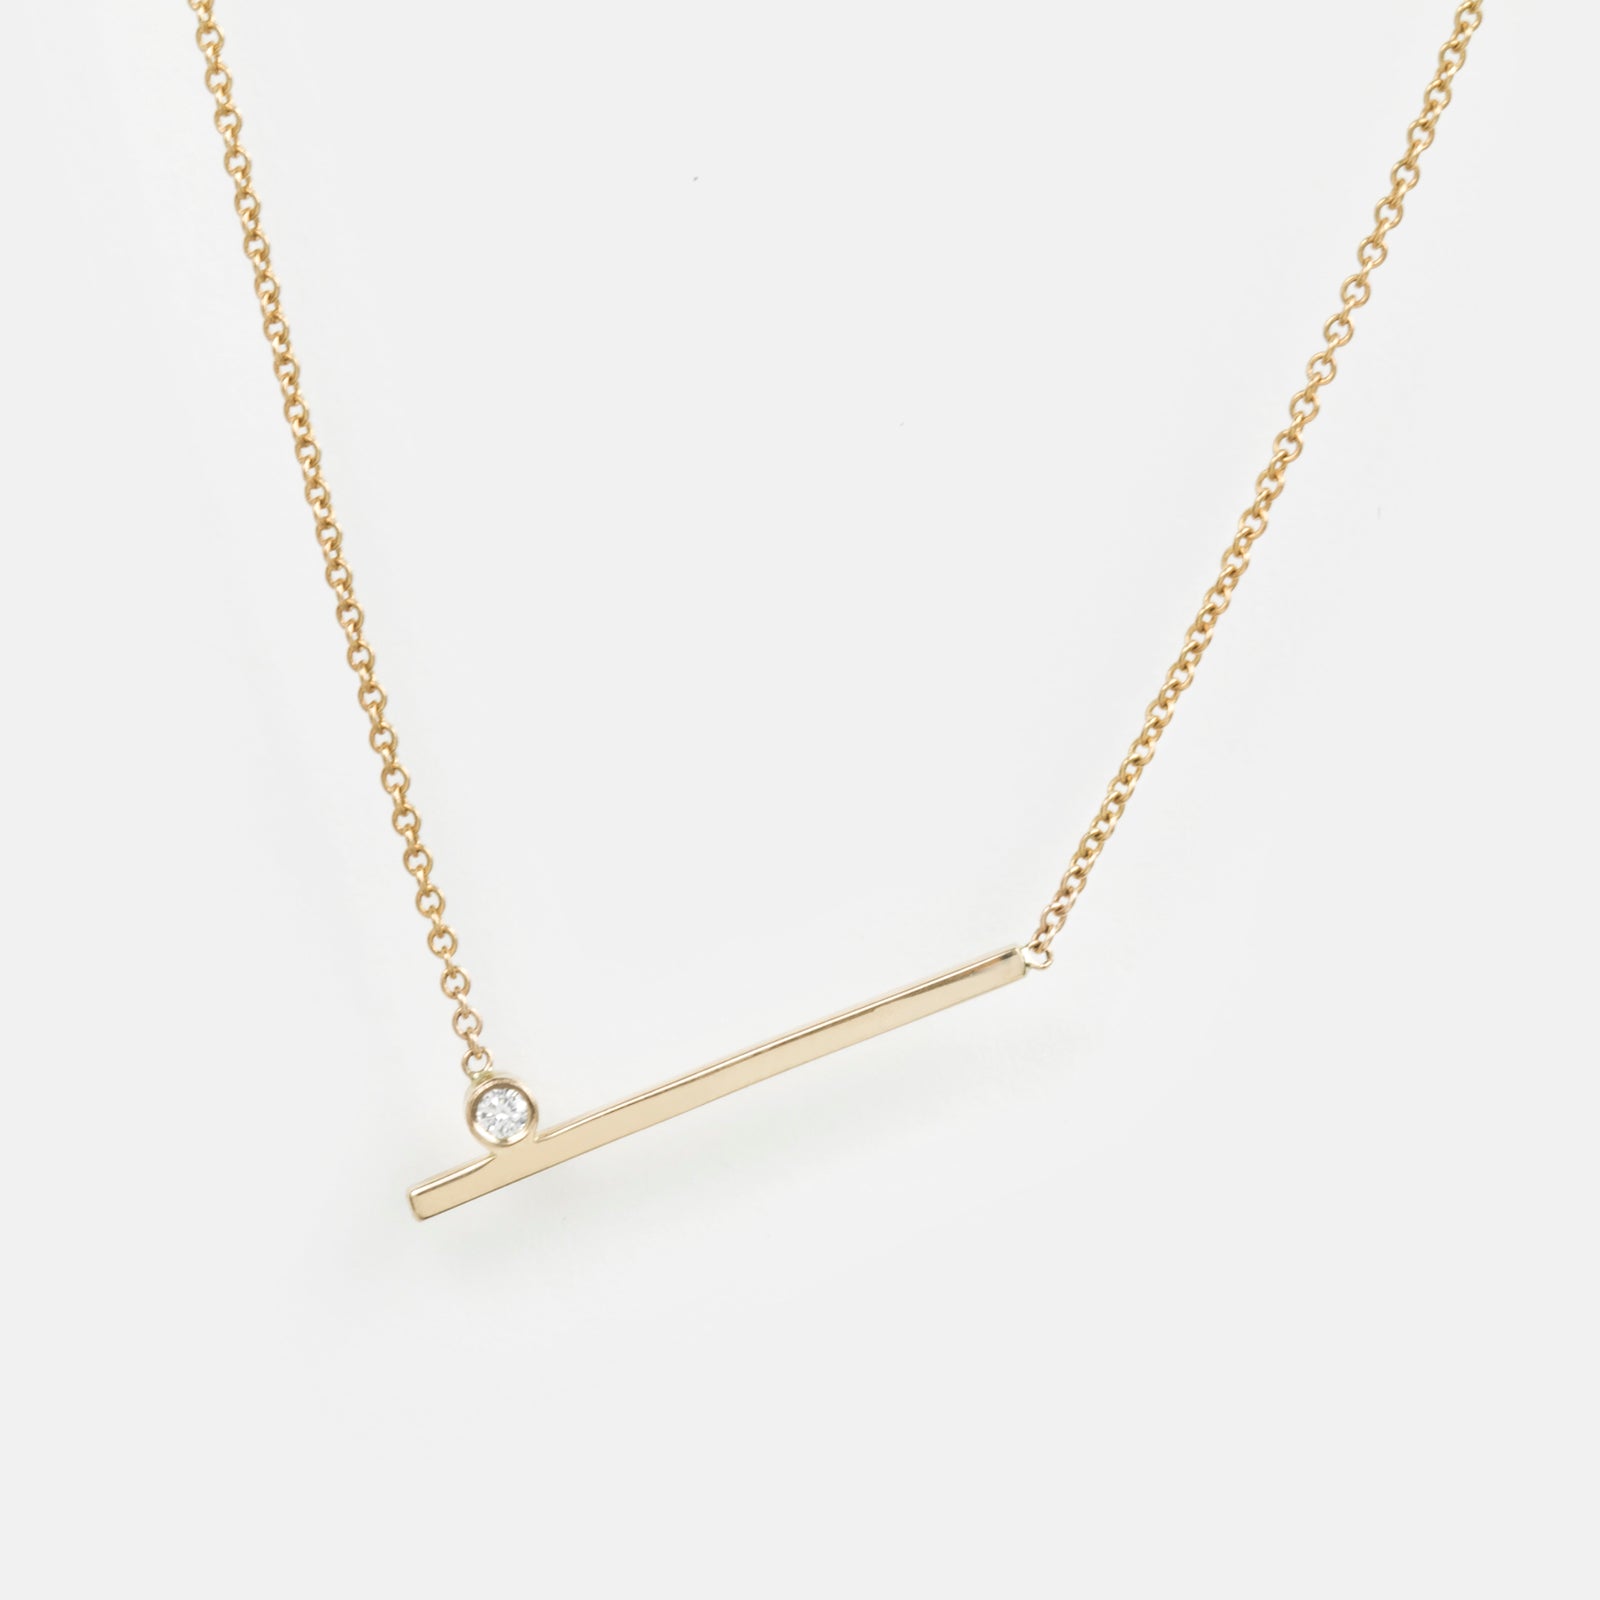 Livi Handmade Necklace in 14k Gold Set with White Diamond By SHW Fine Jewelry New York City